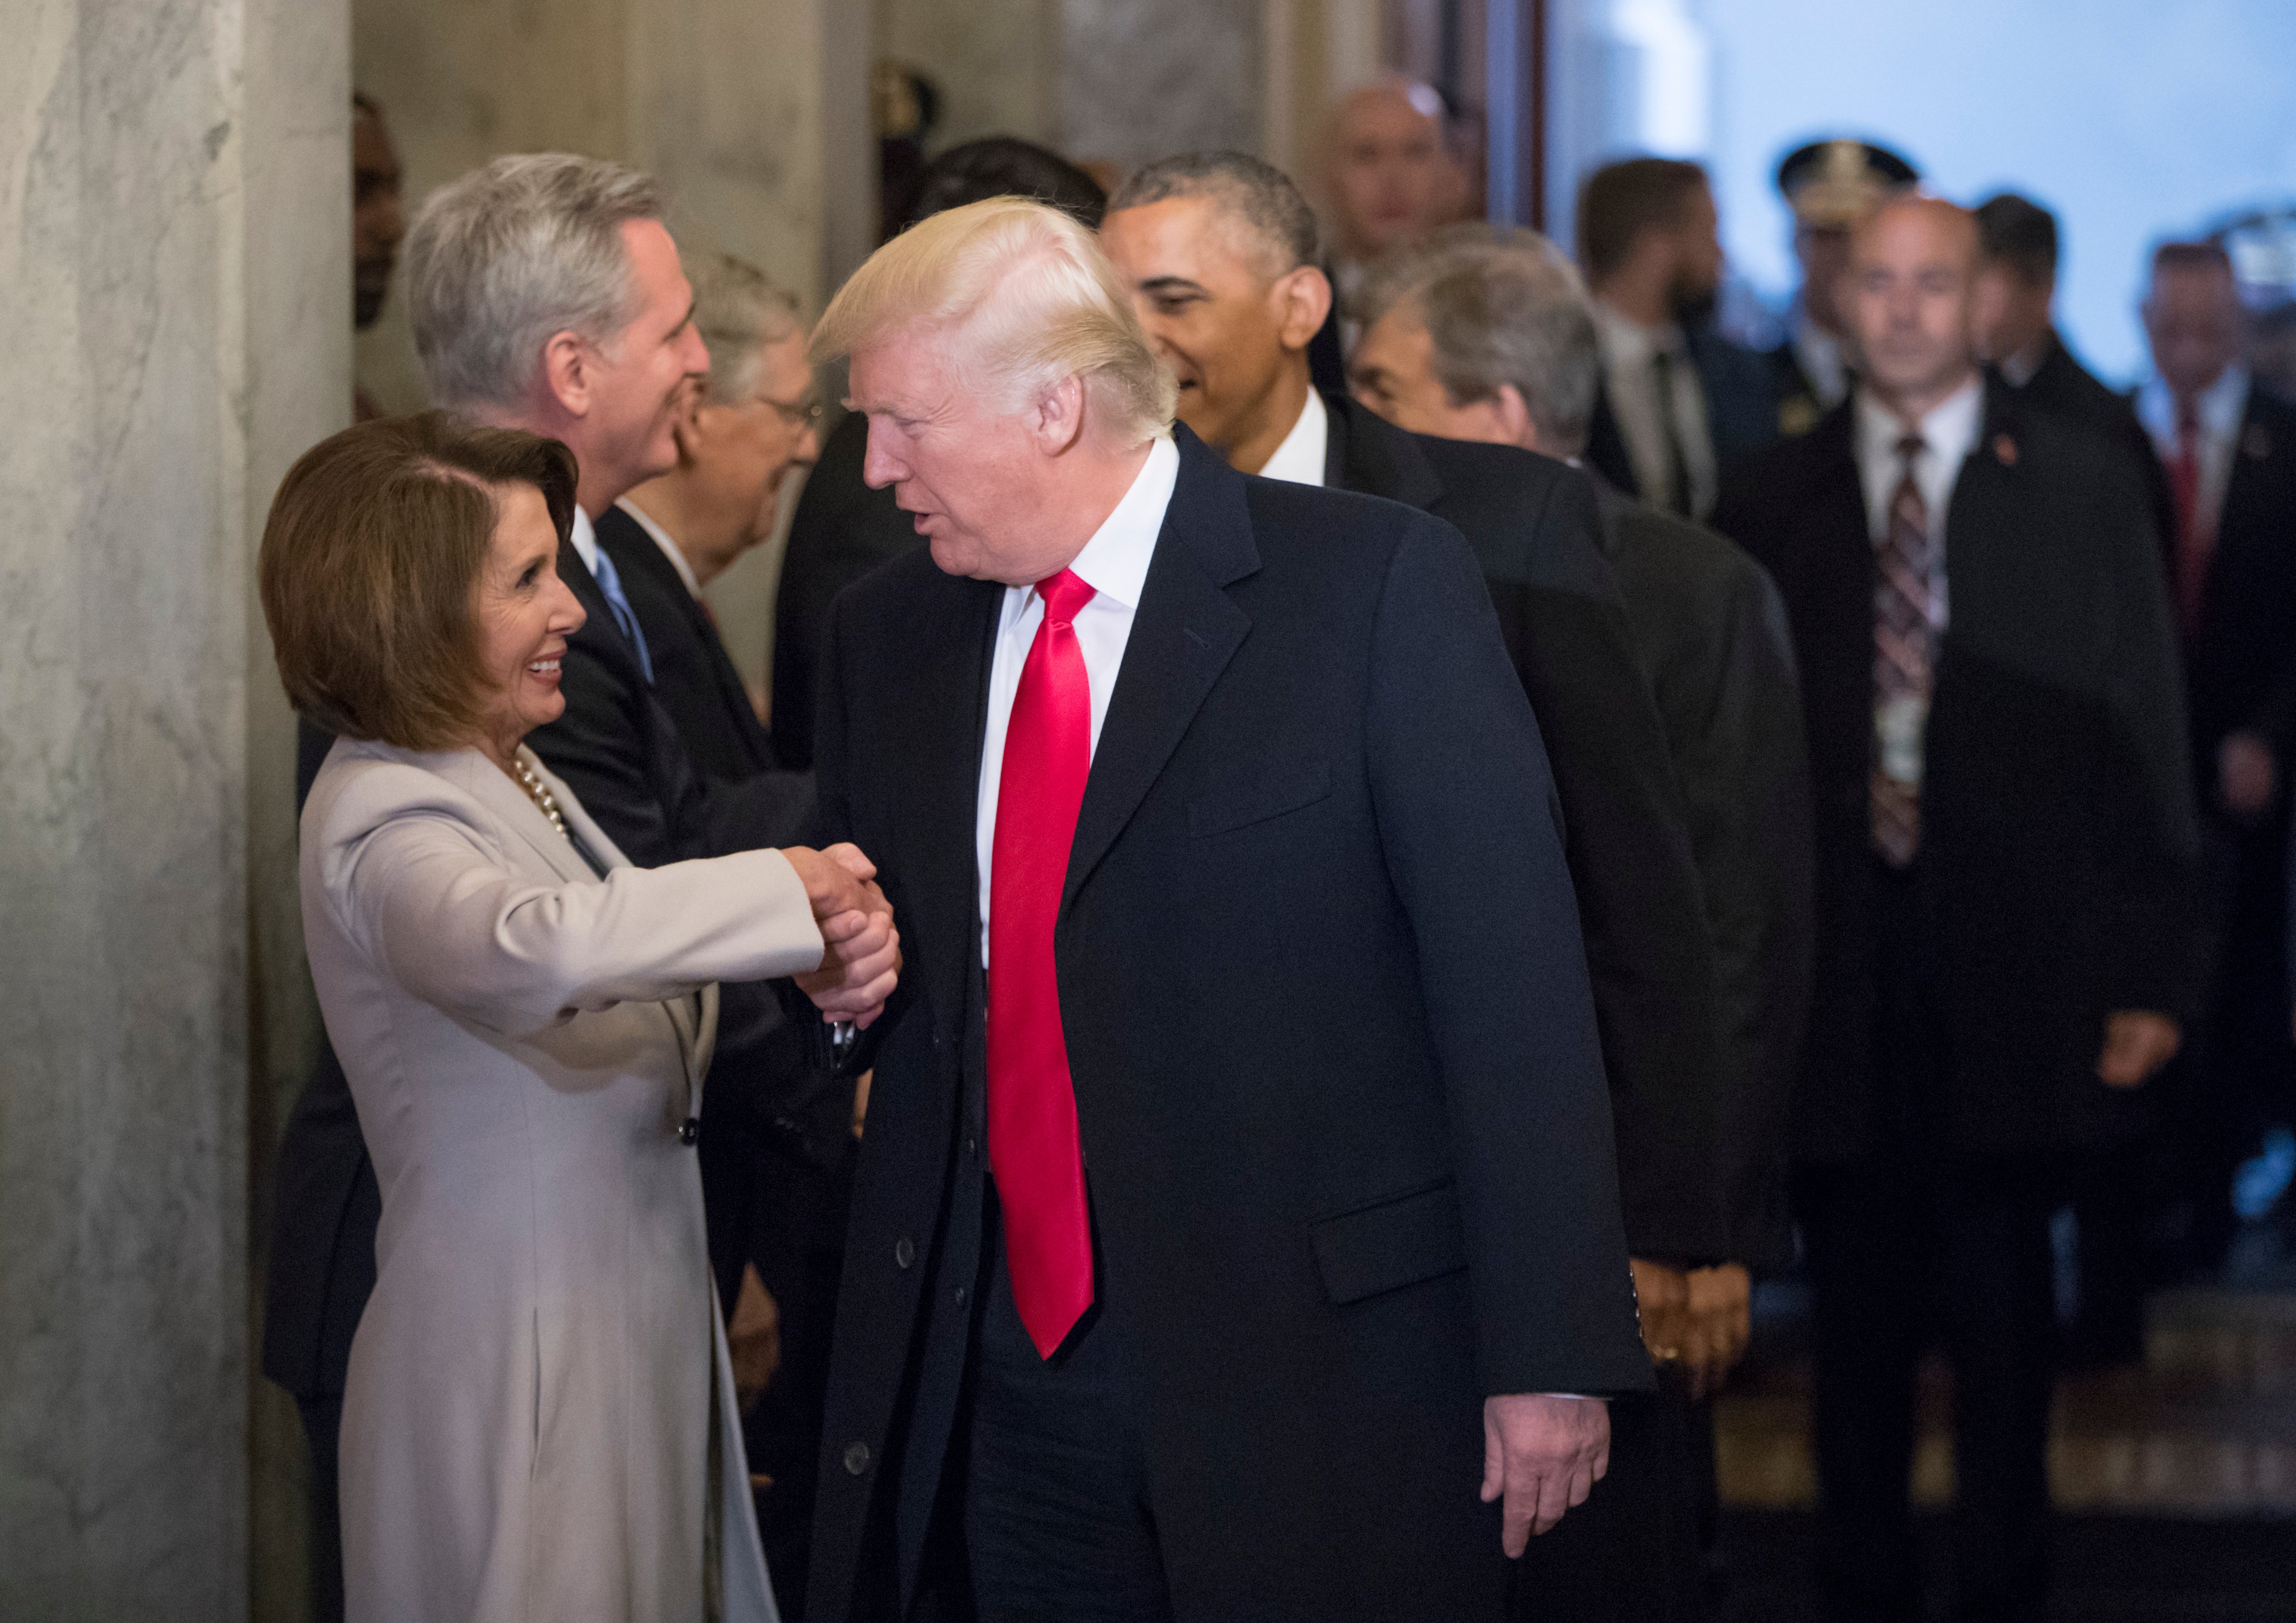 WASHINGTON, DC - JANUARY 20: President-elect Donald Trump (C) and President Barack Obama (R) are greeted by members of the Congressional leadership including House Minority Leader Nancy Pelosi (D-CA) as they arrive for Trump's inauguration ceremony at the Capitol on January 20, 2017 in Washington, DC. Trump became the 45th president of the United States. (Photo by J. Scott Applewhite - Pool/Getty Images)